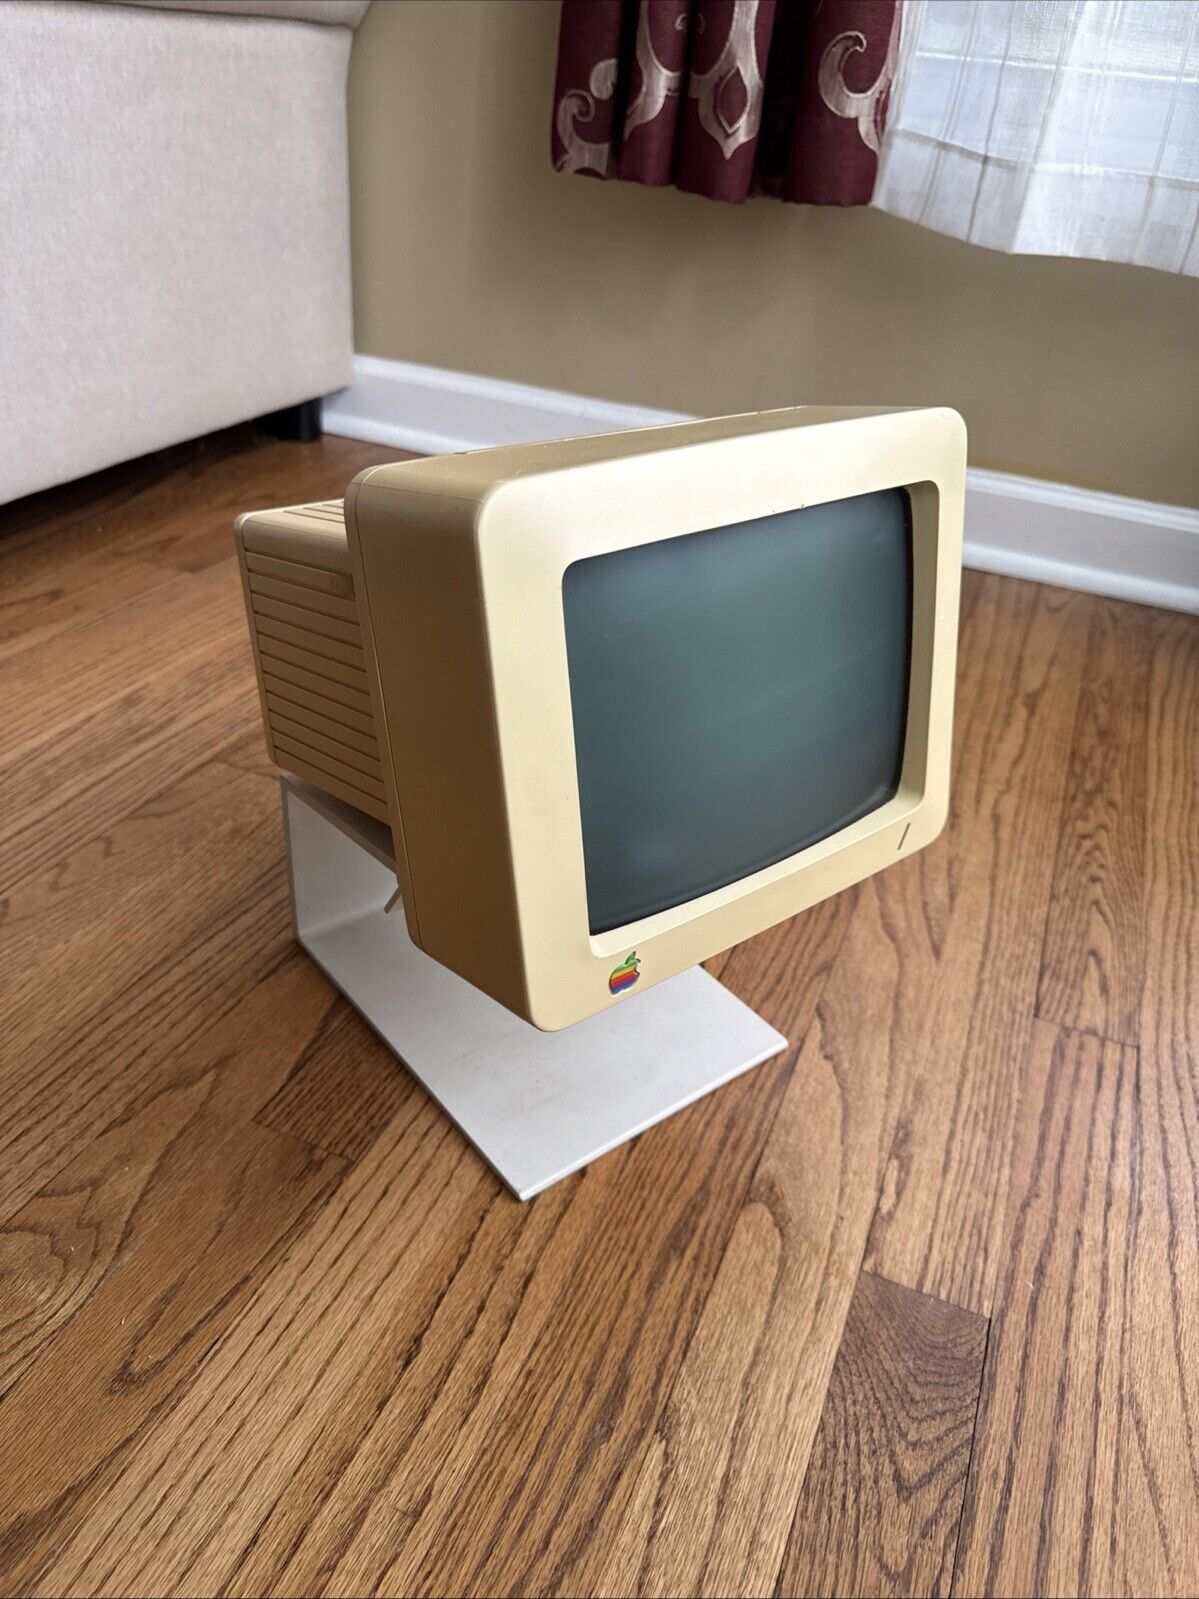 Vintage Apple Computer Monitor G090S A2M4090 w/ Stand - Tested